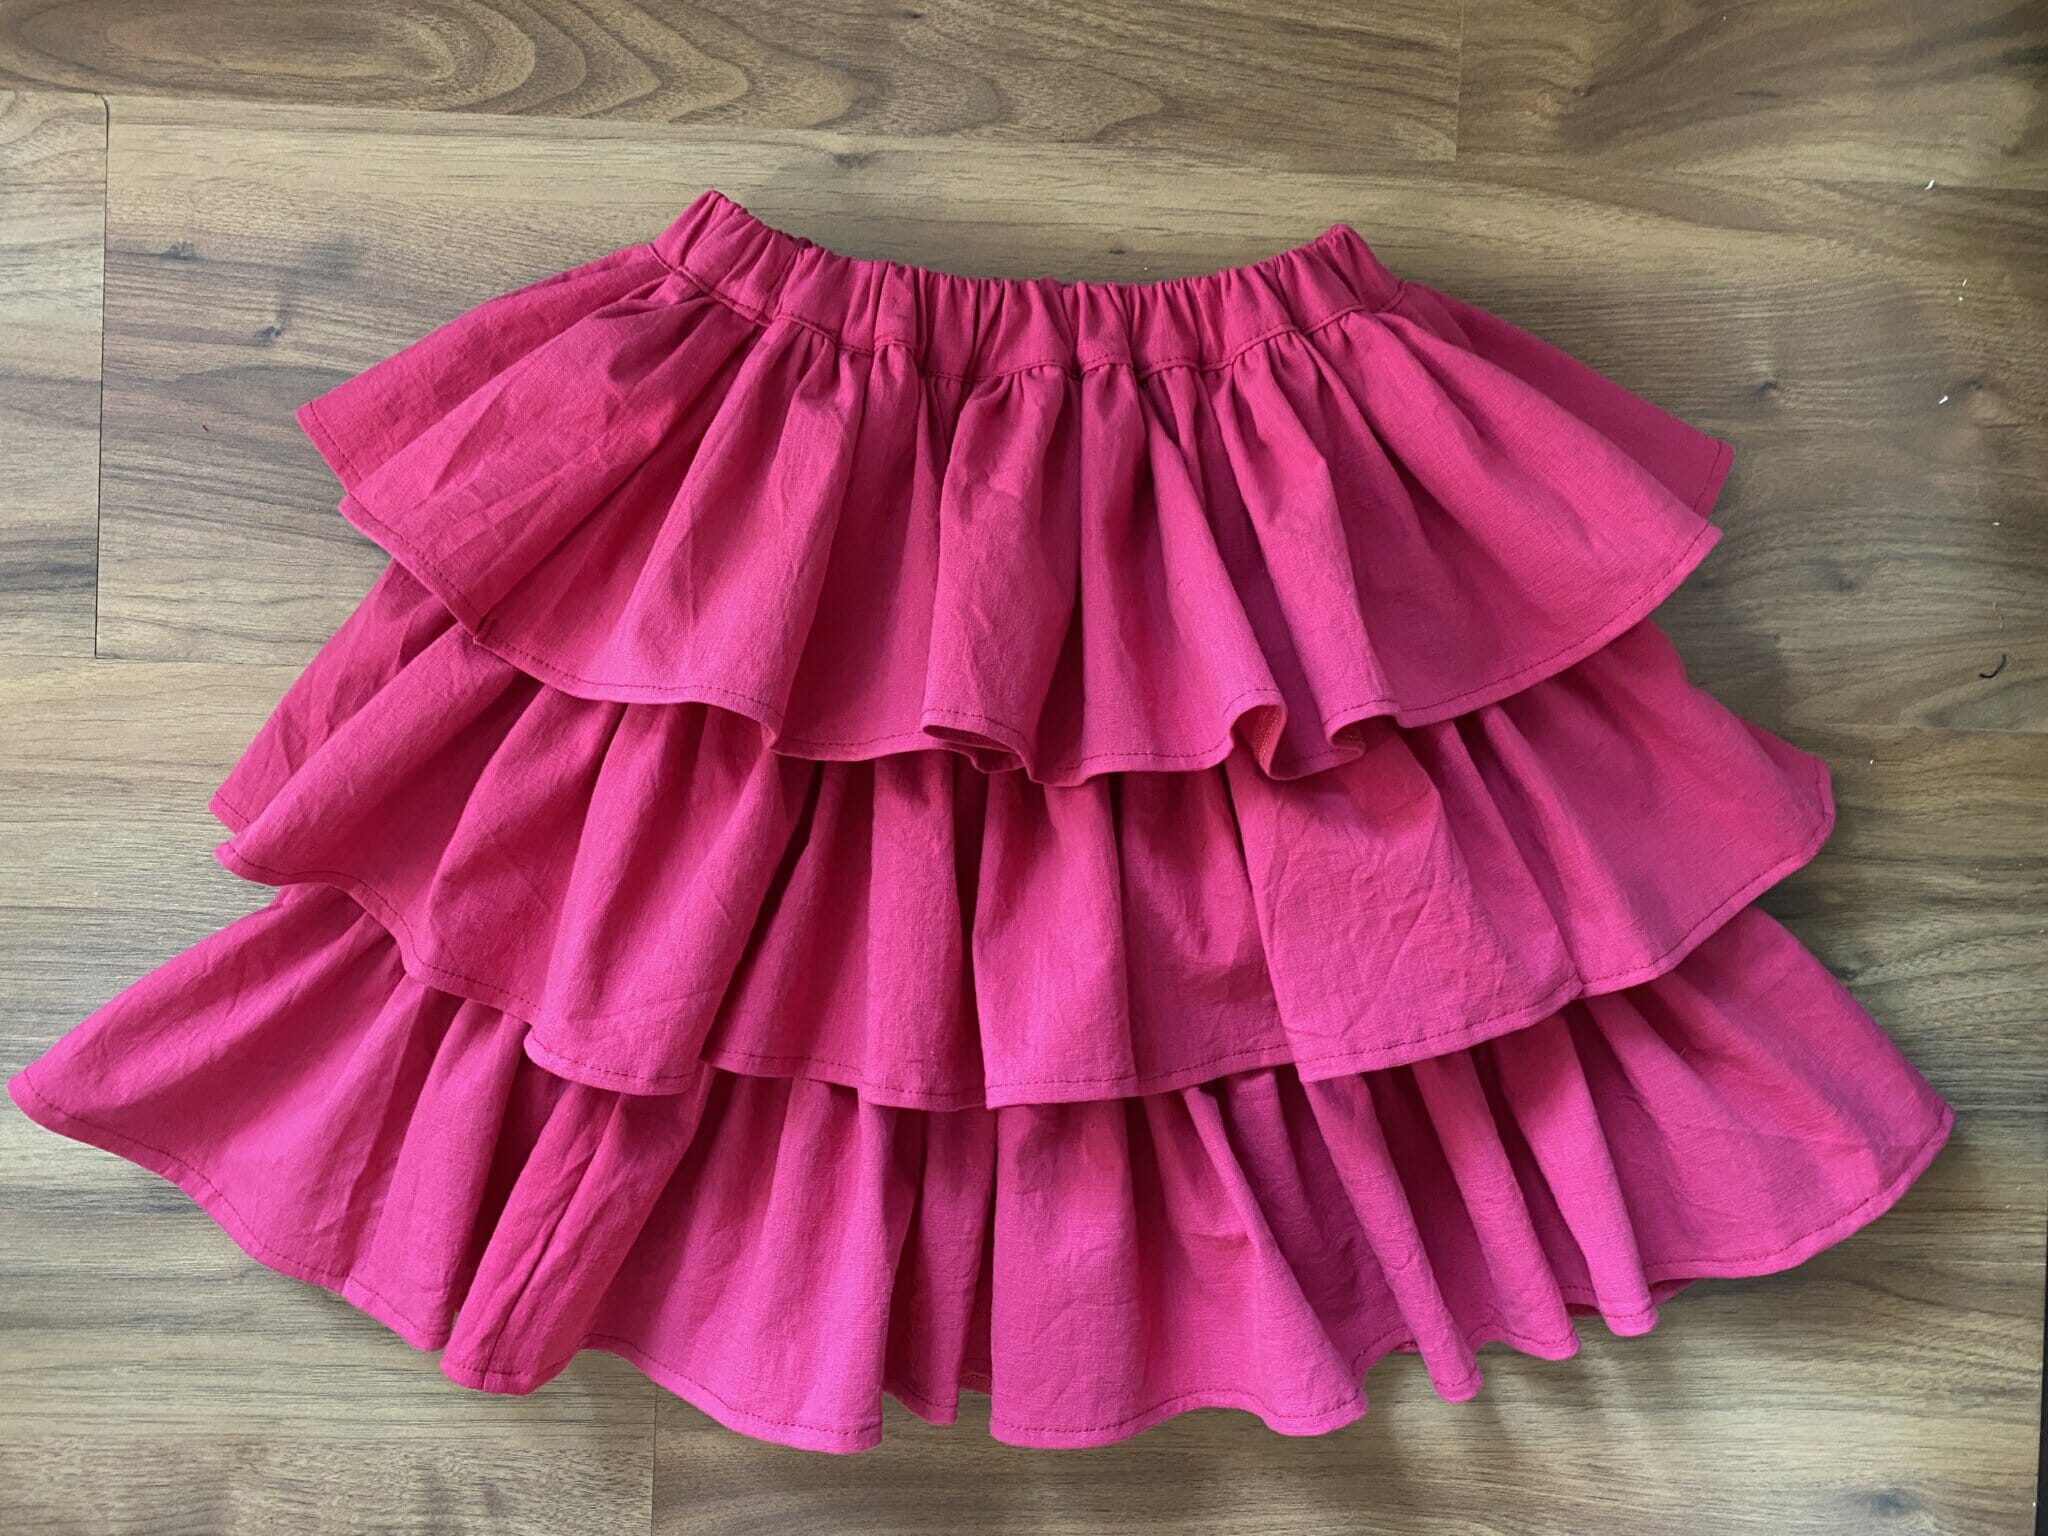 DIY tutorial Tiered ruffle skirt with elastic waistband I Can Sew This